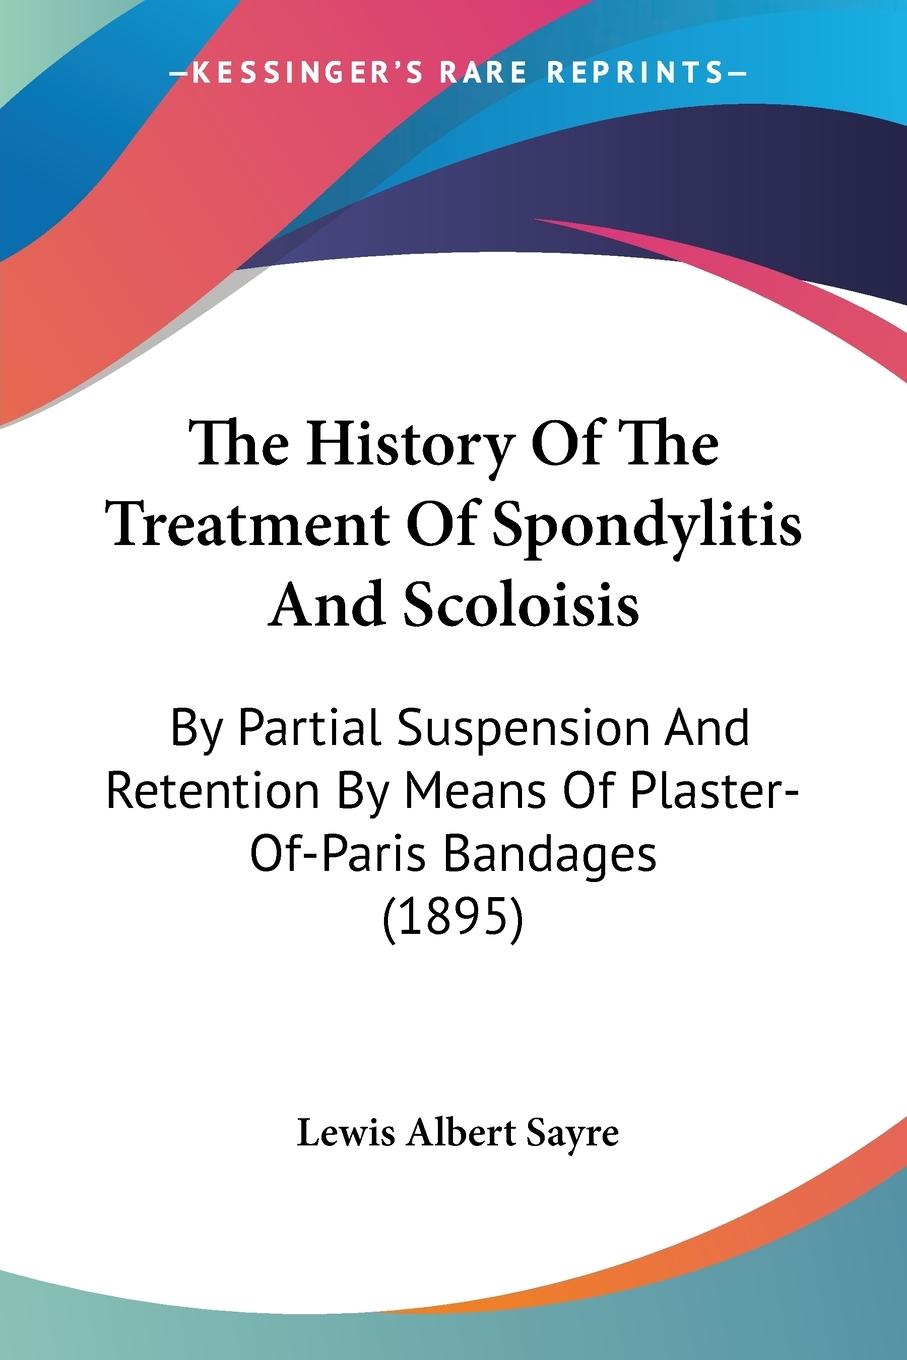 The History Of The Treatment Of Spondylitis And Scoloisis - Sayre, Lewis Albert